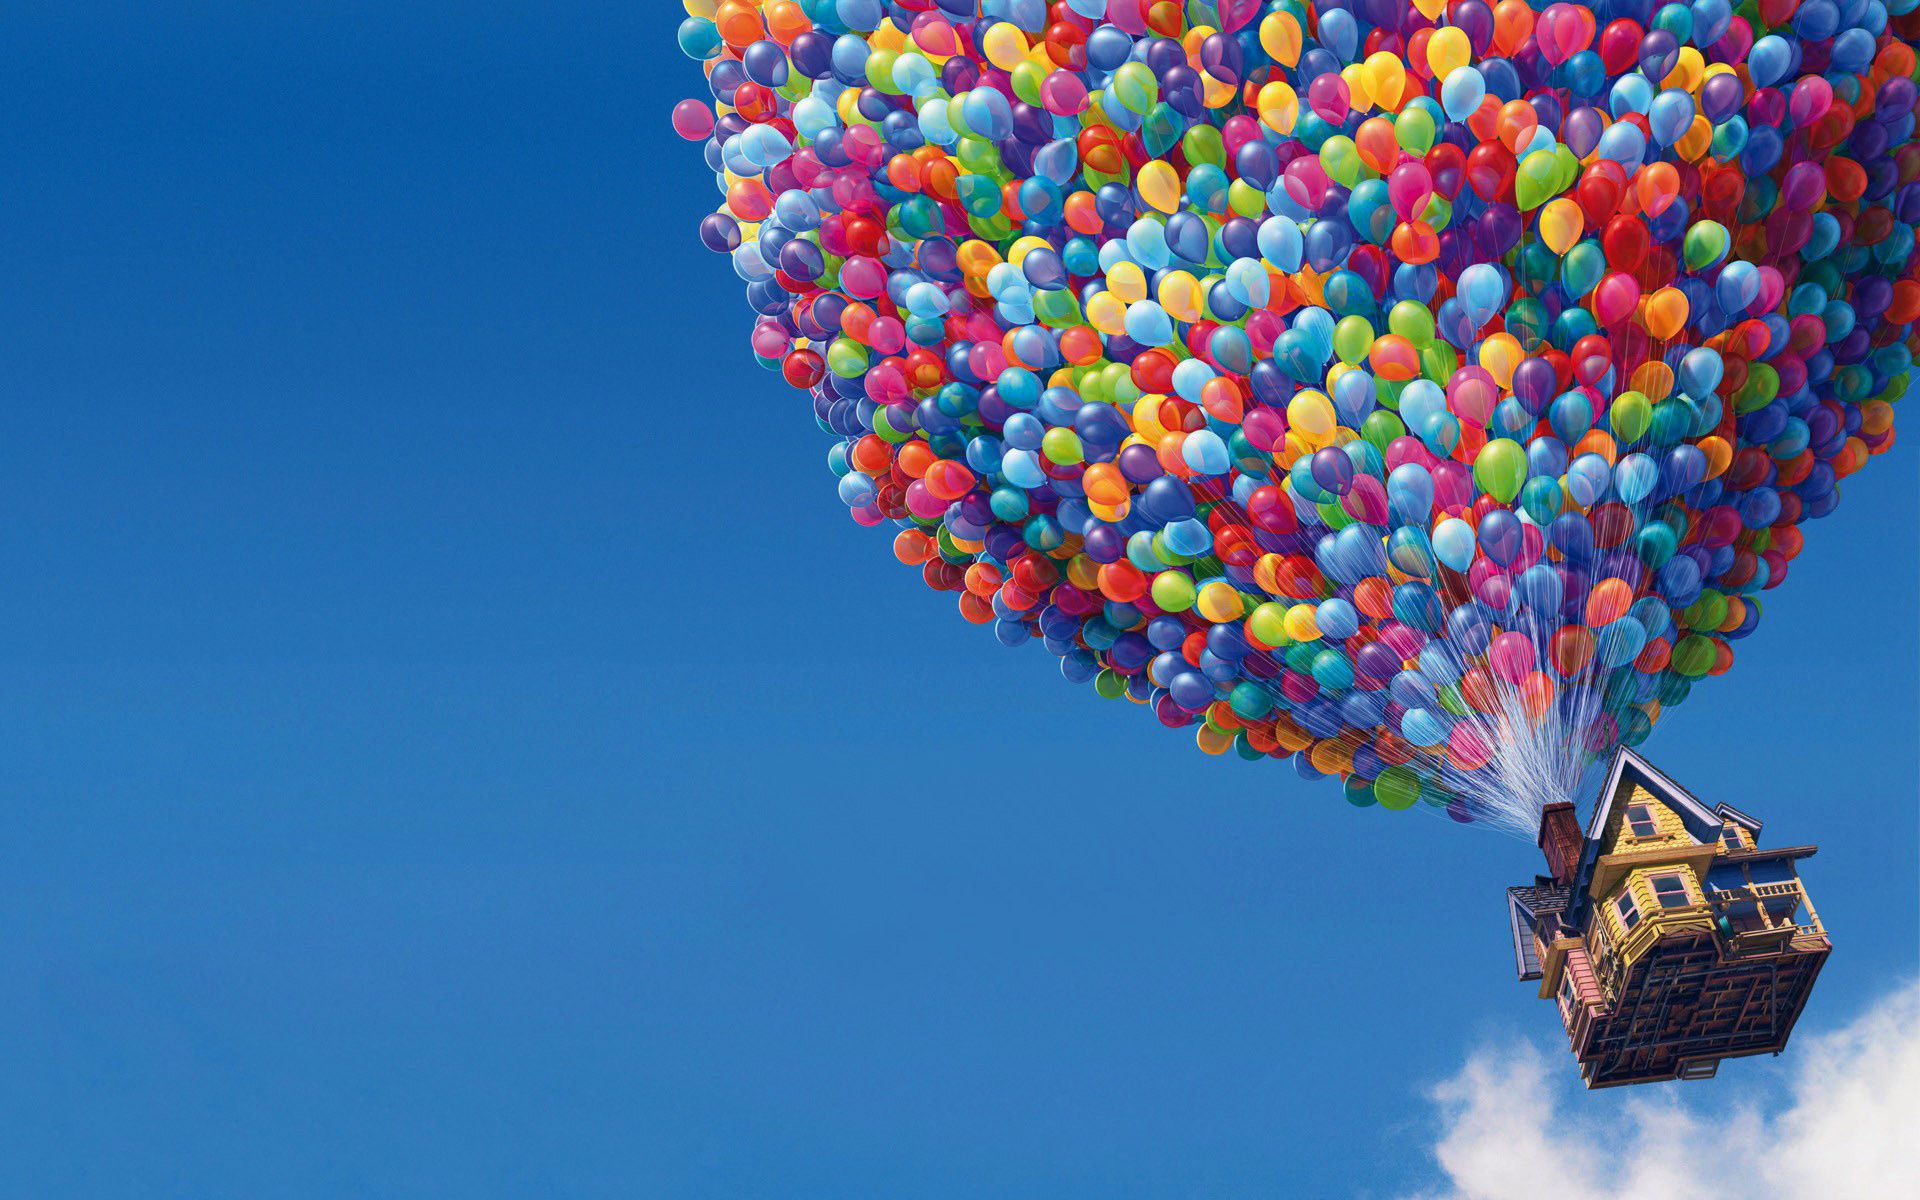 HD wallpaper, In, Movie, House, Up, Balloons